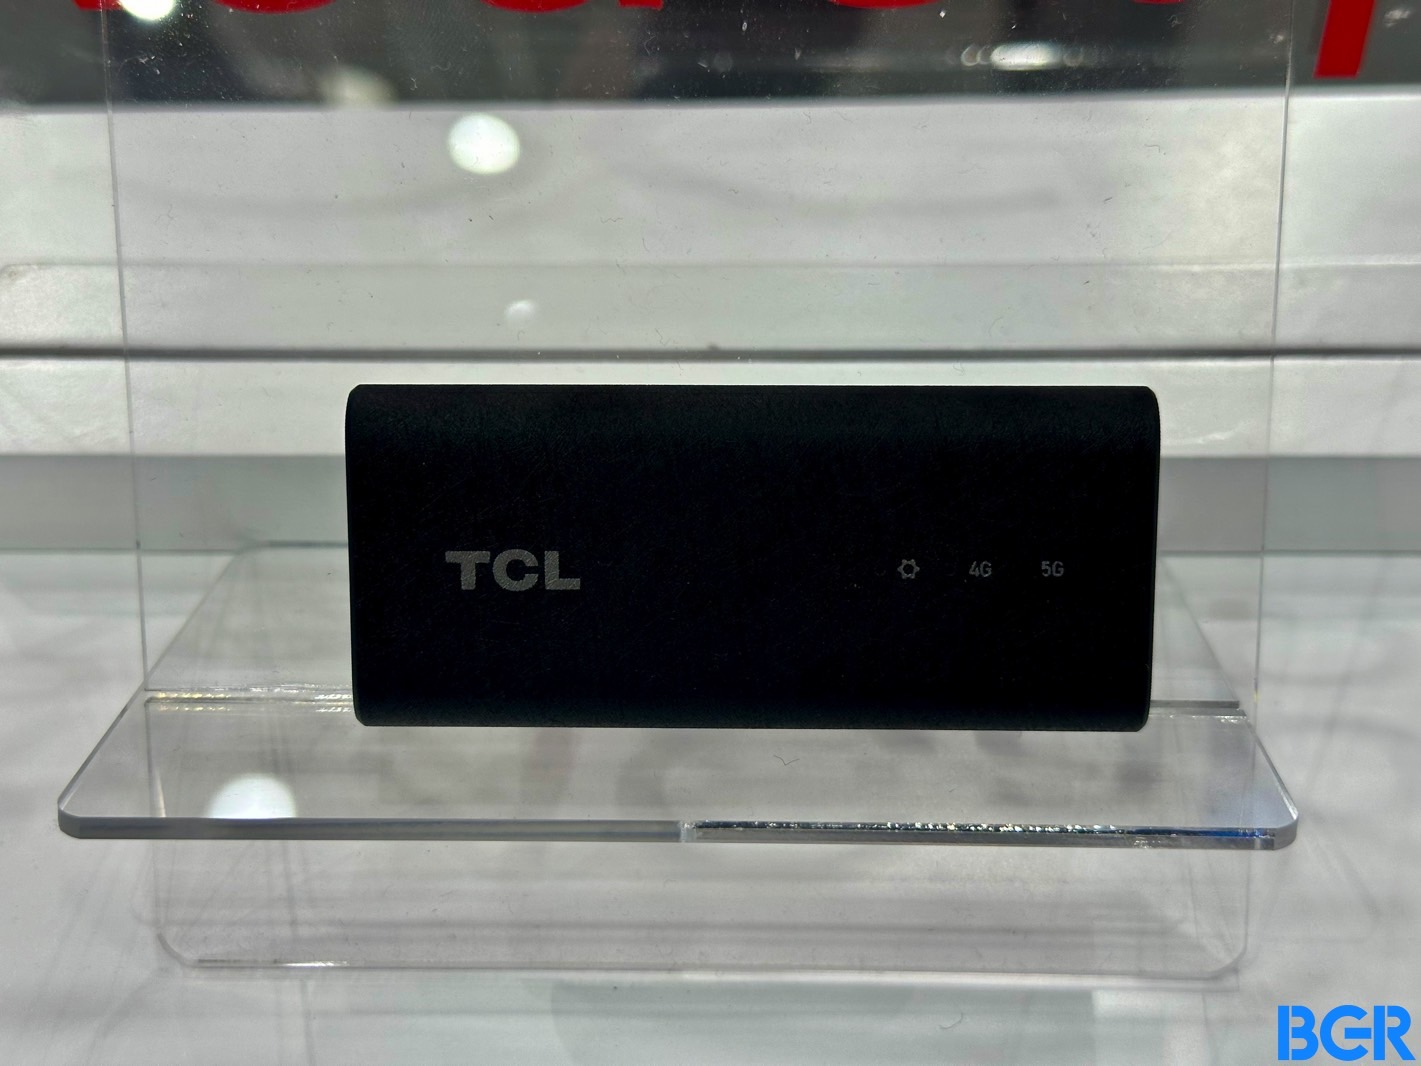 A closer look at TCL's new 5G RedCap dongle.